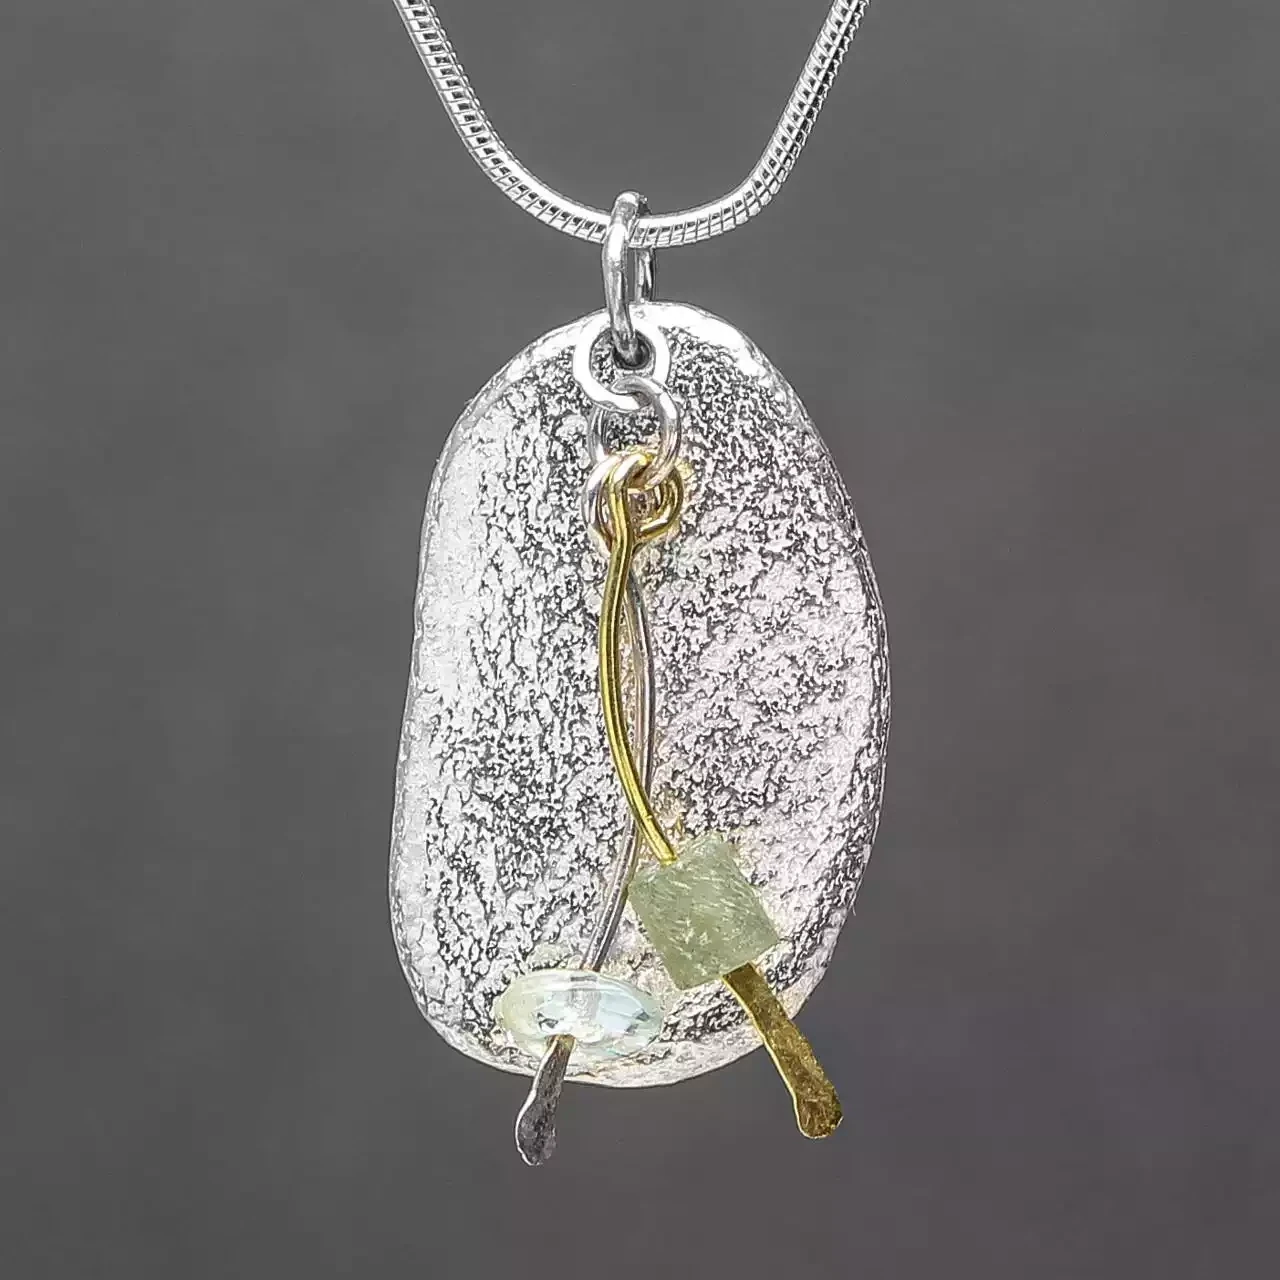 Silver Pebble Pendant With Glass, Rock Quartz Beads and Gold Detail - Large by Silverfish